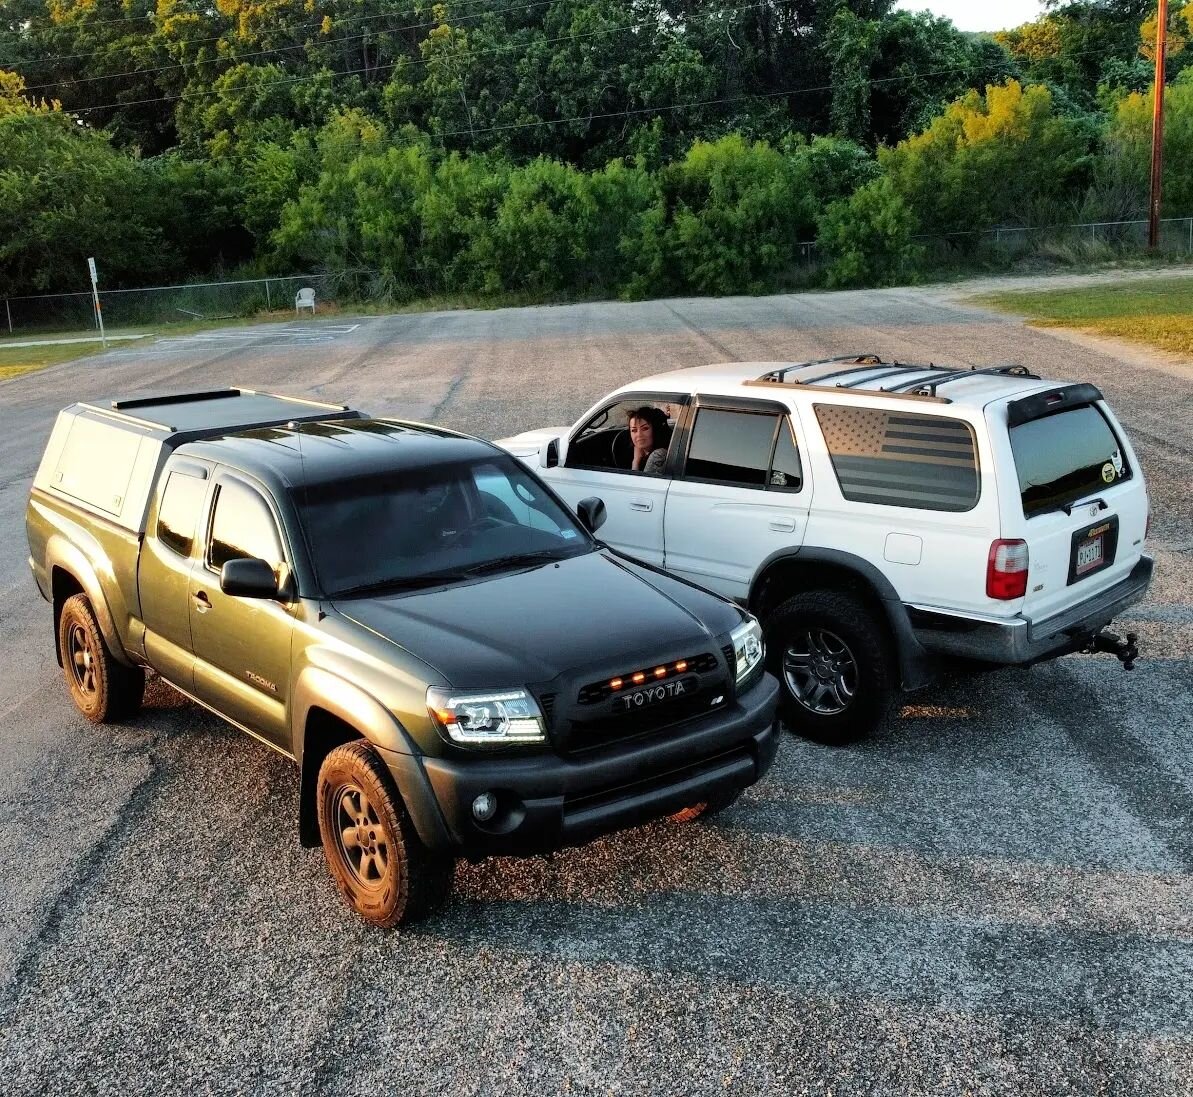 #ToyotaTuesday His &amp; Hers trucks! 💙 (of course, by now y'all have seen that @street675r's Tacoma doesn't look like that anymore 😁) Who else keeps it brand-loyal in the fam?! 
.
.
.
.
.
.
.
.
Alright, I guess I'd better get back to the Supras!!.